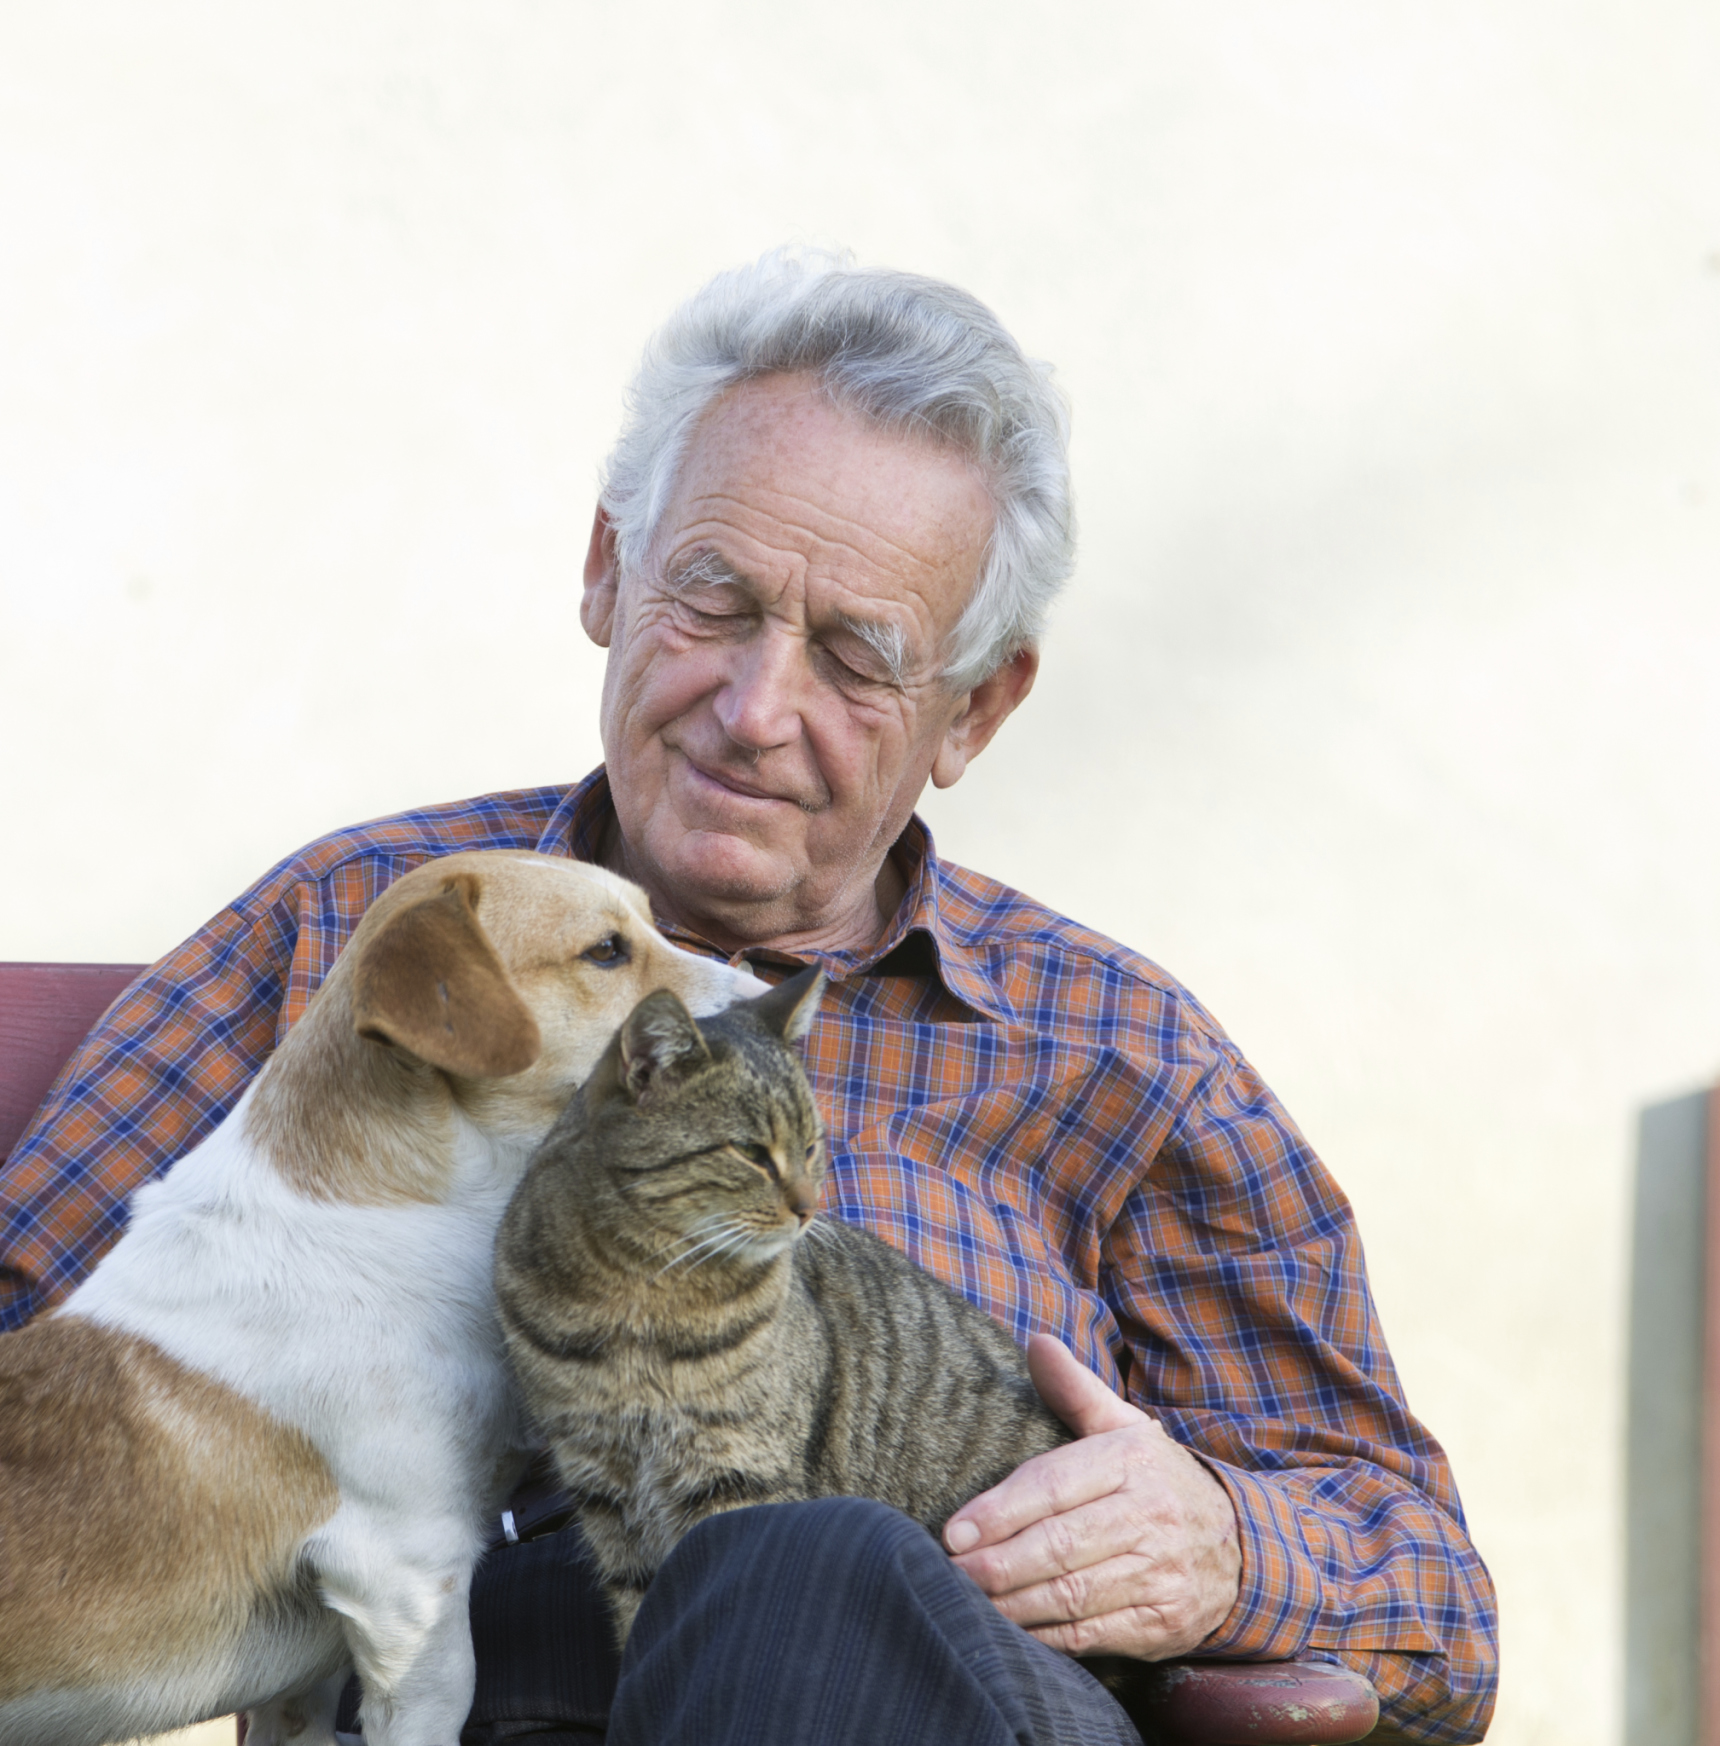 The perks of pet ownership for retirees